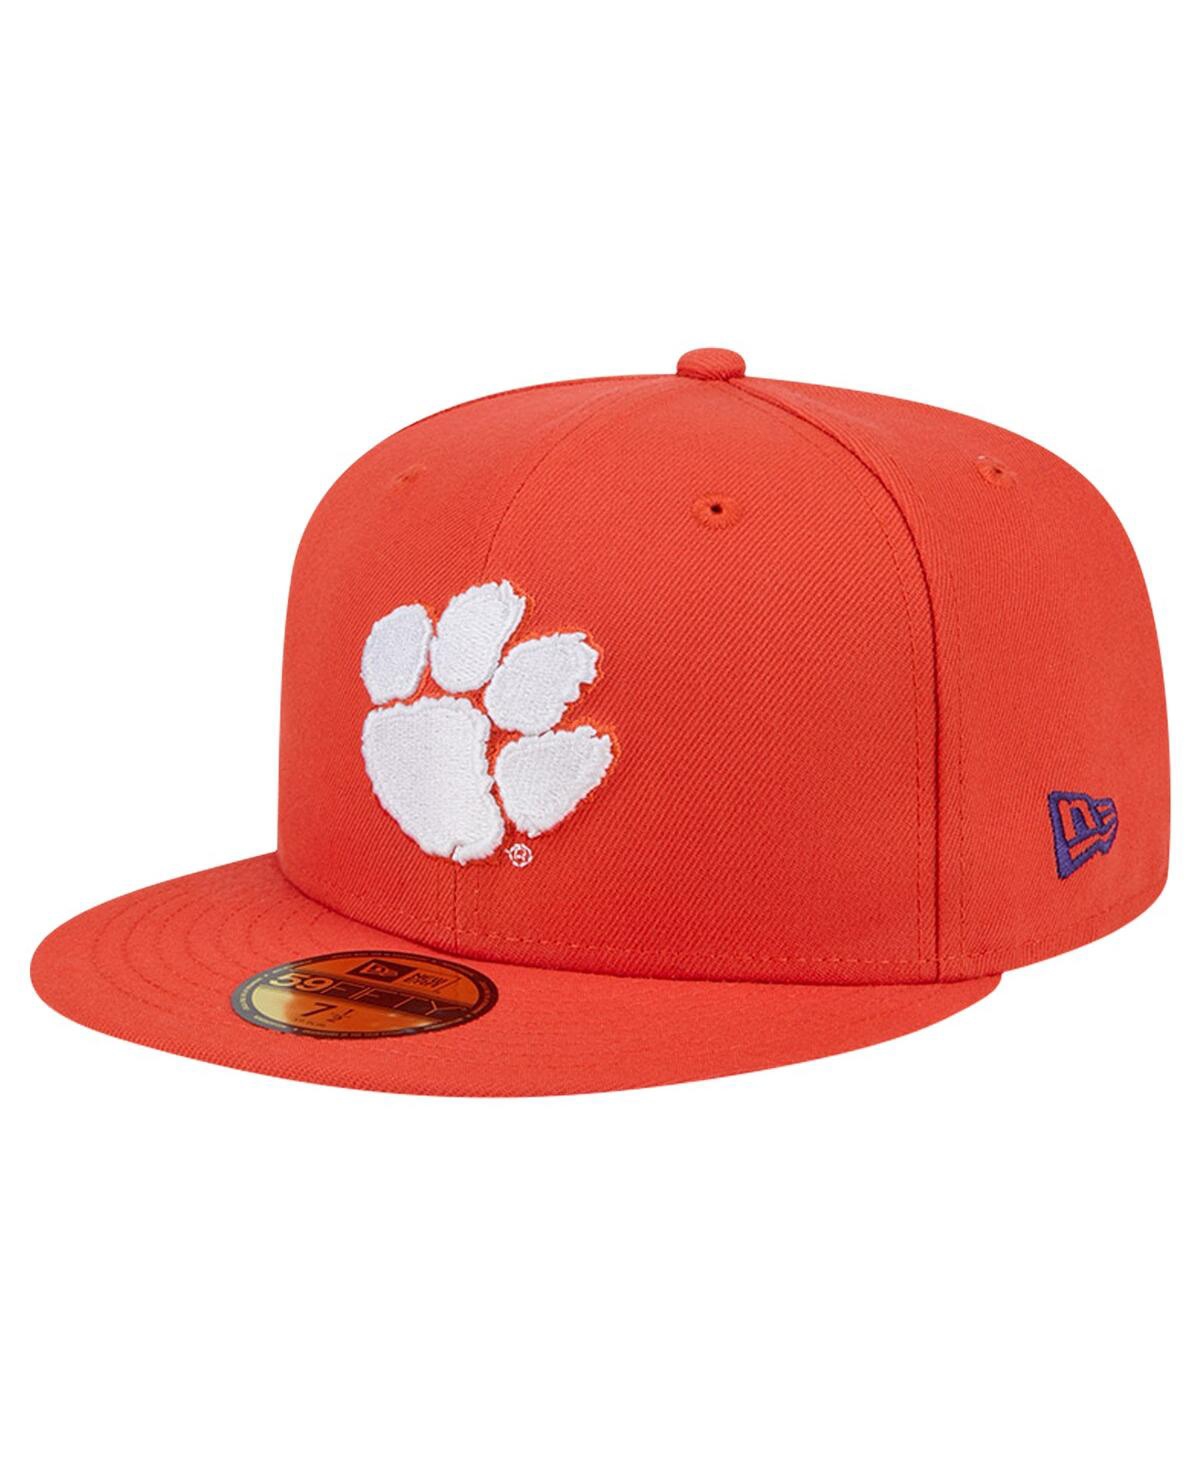 Shop New Era Men's Orange Clemson Tigers Throwback 59fifty Fitted Hat